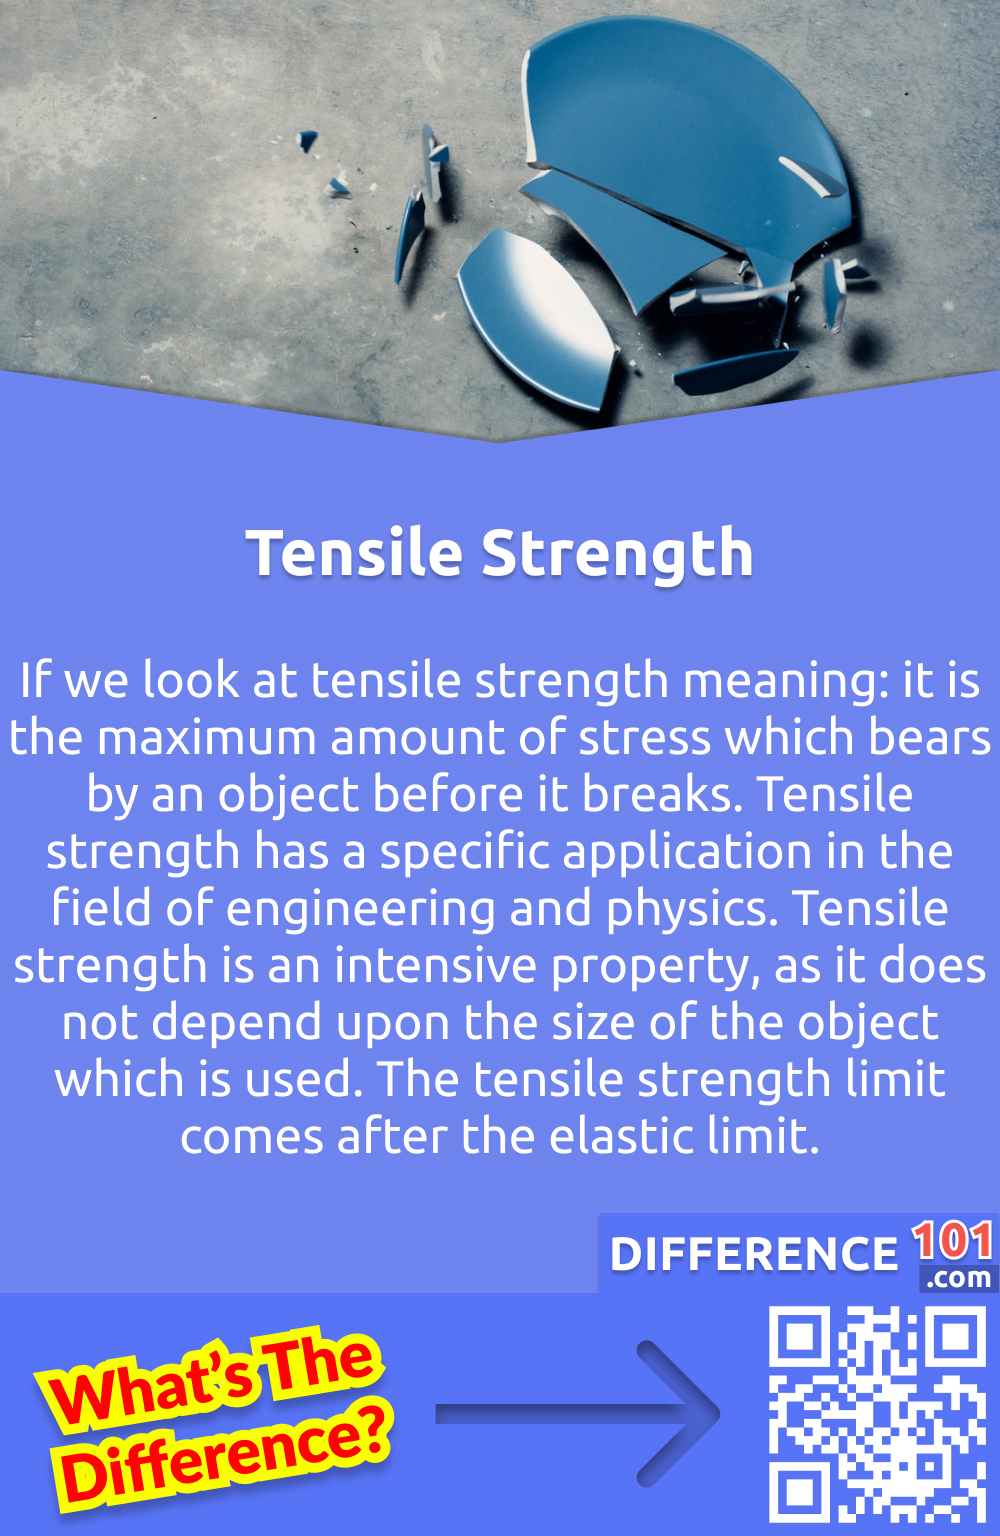 What Is Tensile Strength? If we look at tensile strength meaning: it is the maximum amount of stress which bears by an object before it breaks. Tensile strength has a specific application in the field of engineering and physics. Tensile strength is an intensive property, as it does not depend upon the size of the object which is used. The tensile strength limit comes after the elastic limit. The difference between tensile and yield strength depends upon a few factors. As yield strength is the minimum force, it causes the deformation of that object permanently. While tensile is the maximum force that an object can bear before it starts breaking. So, in this case, the force which is applied externally is greater than the forces of attraction binding that object together.